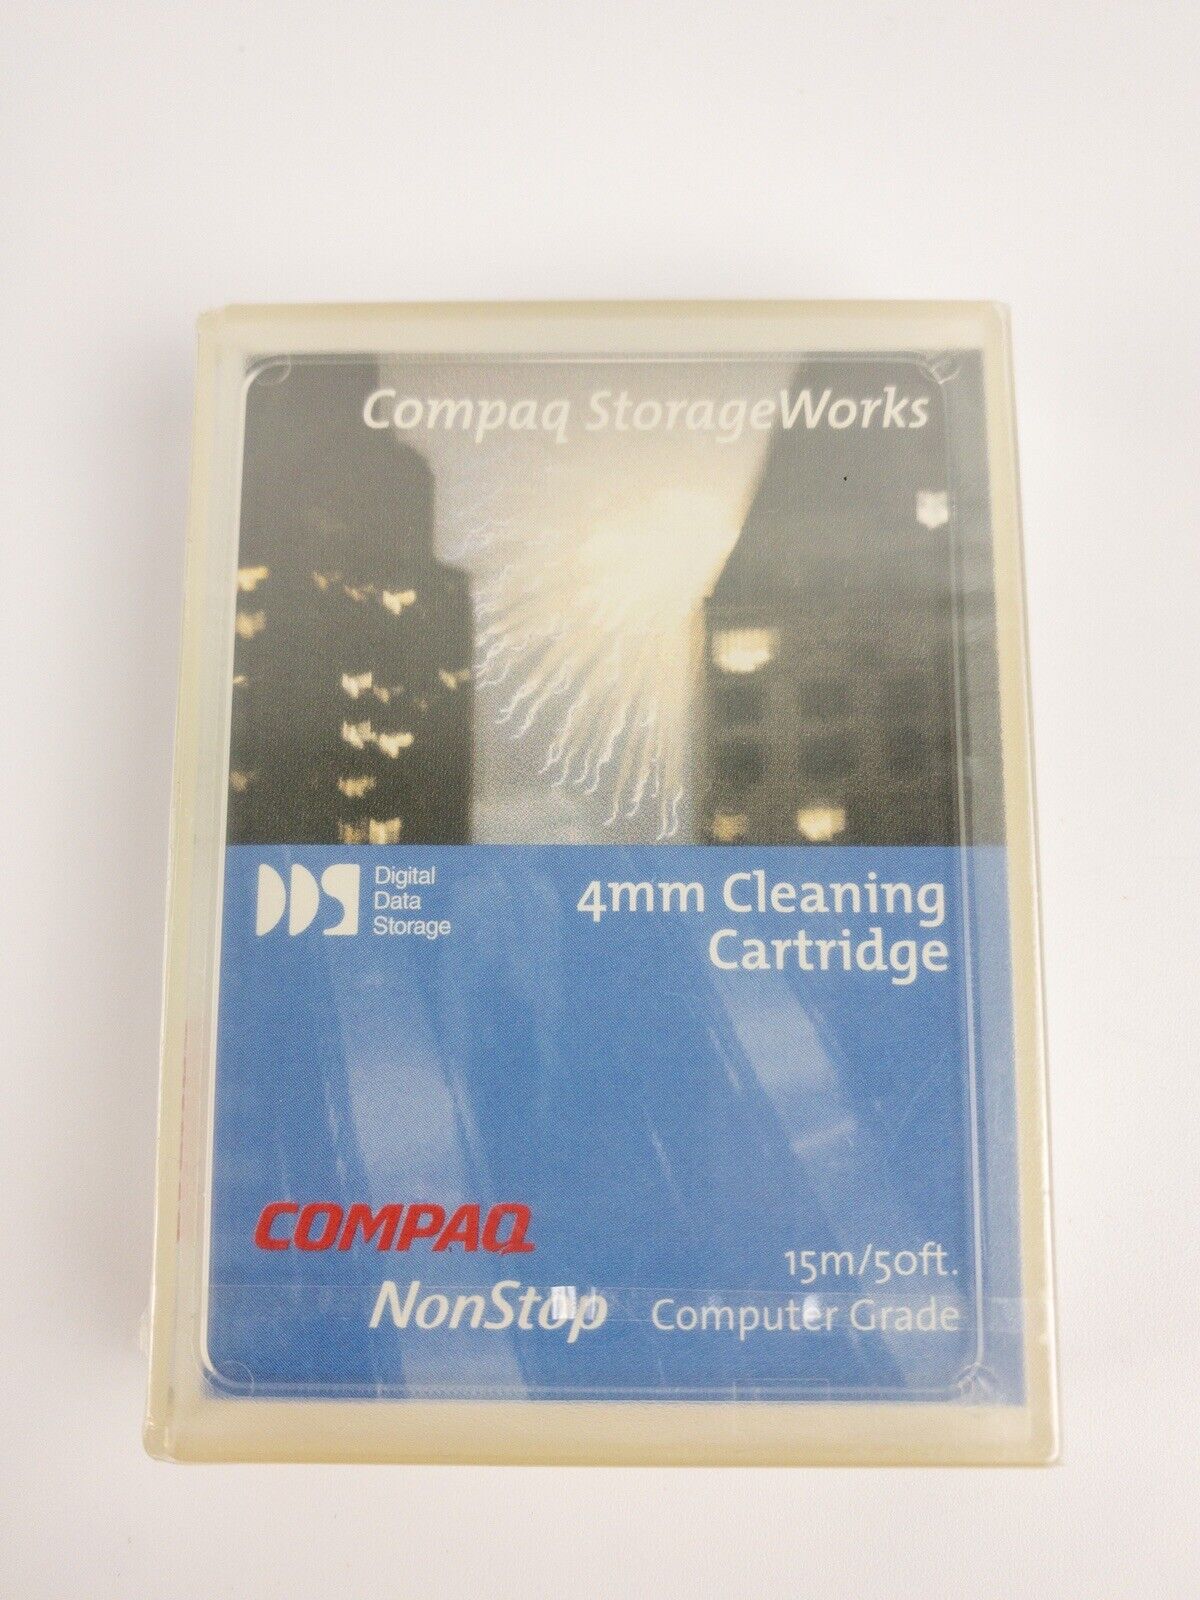 COMPAQ DDS 4mm Cleaning Tape Cartridge. NonStop Computer Grade. 15m/50ft. New!